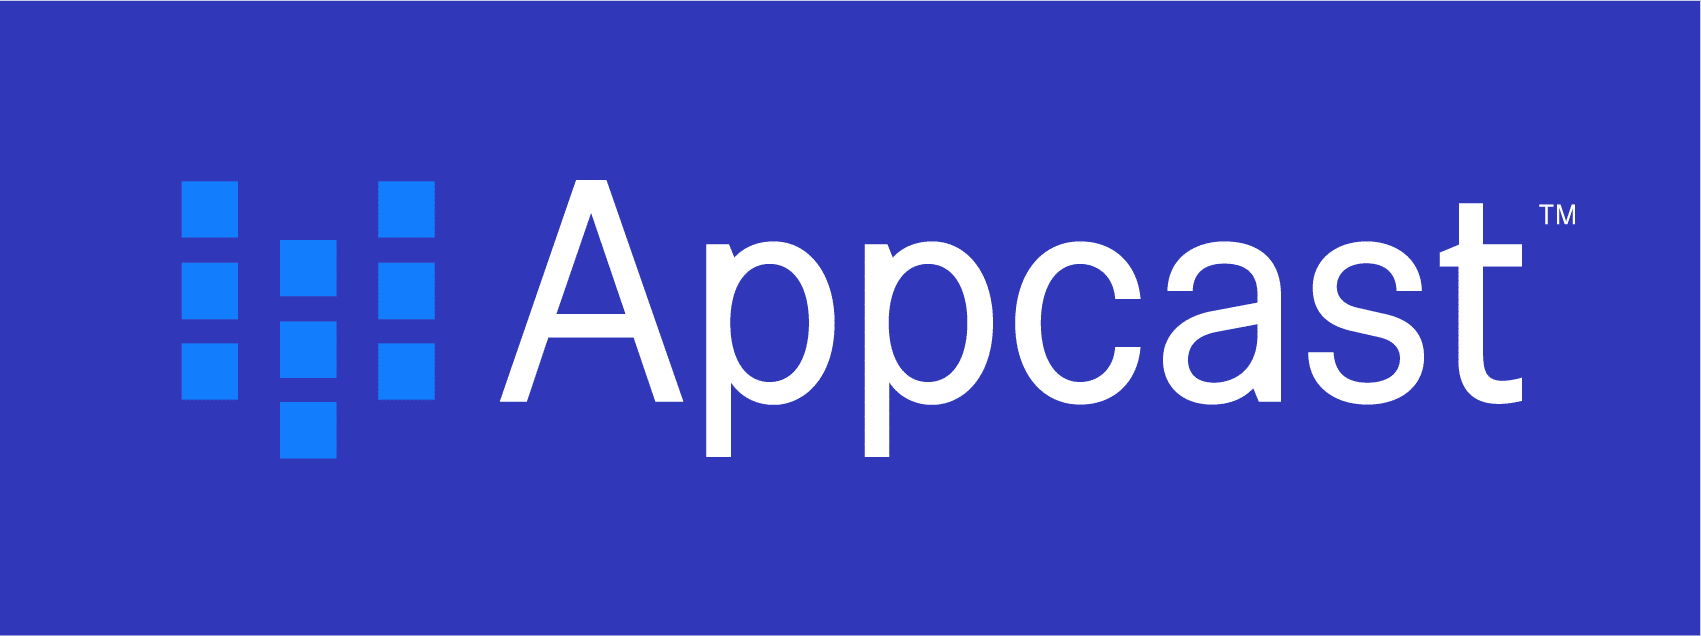 The appcast logo integrated on a blue background for recruiting purposes.